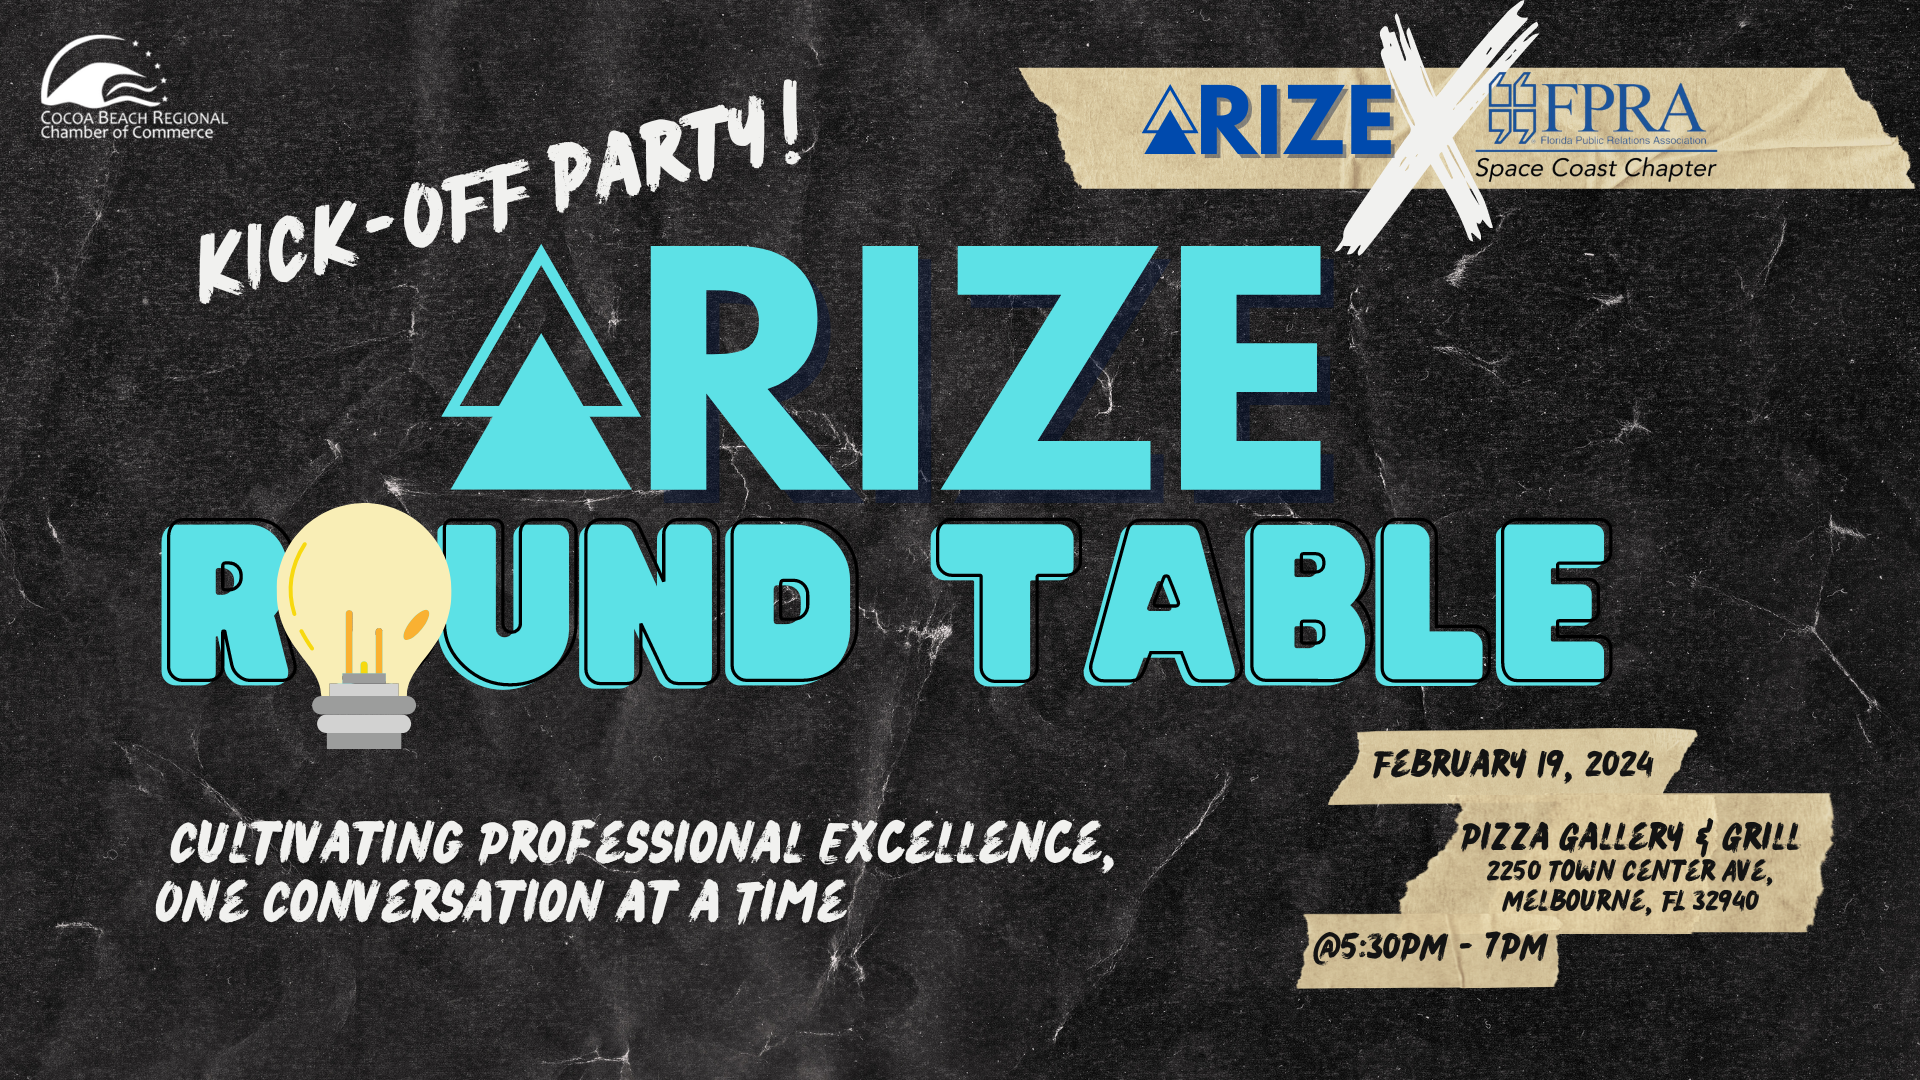 RIZE Round Table Kick-Off Party